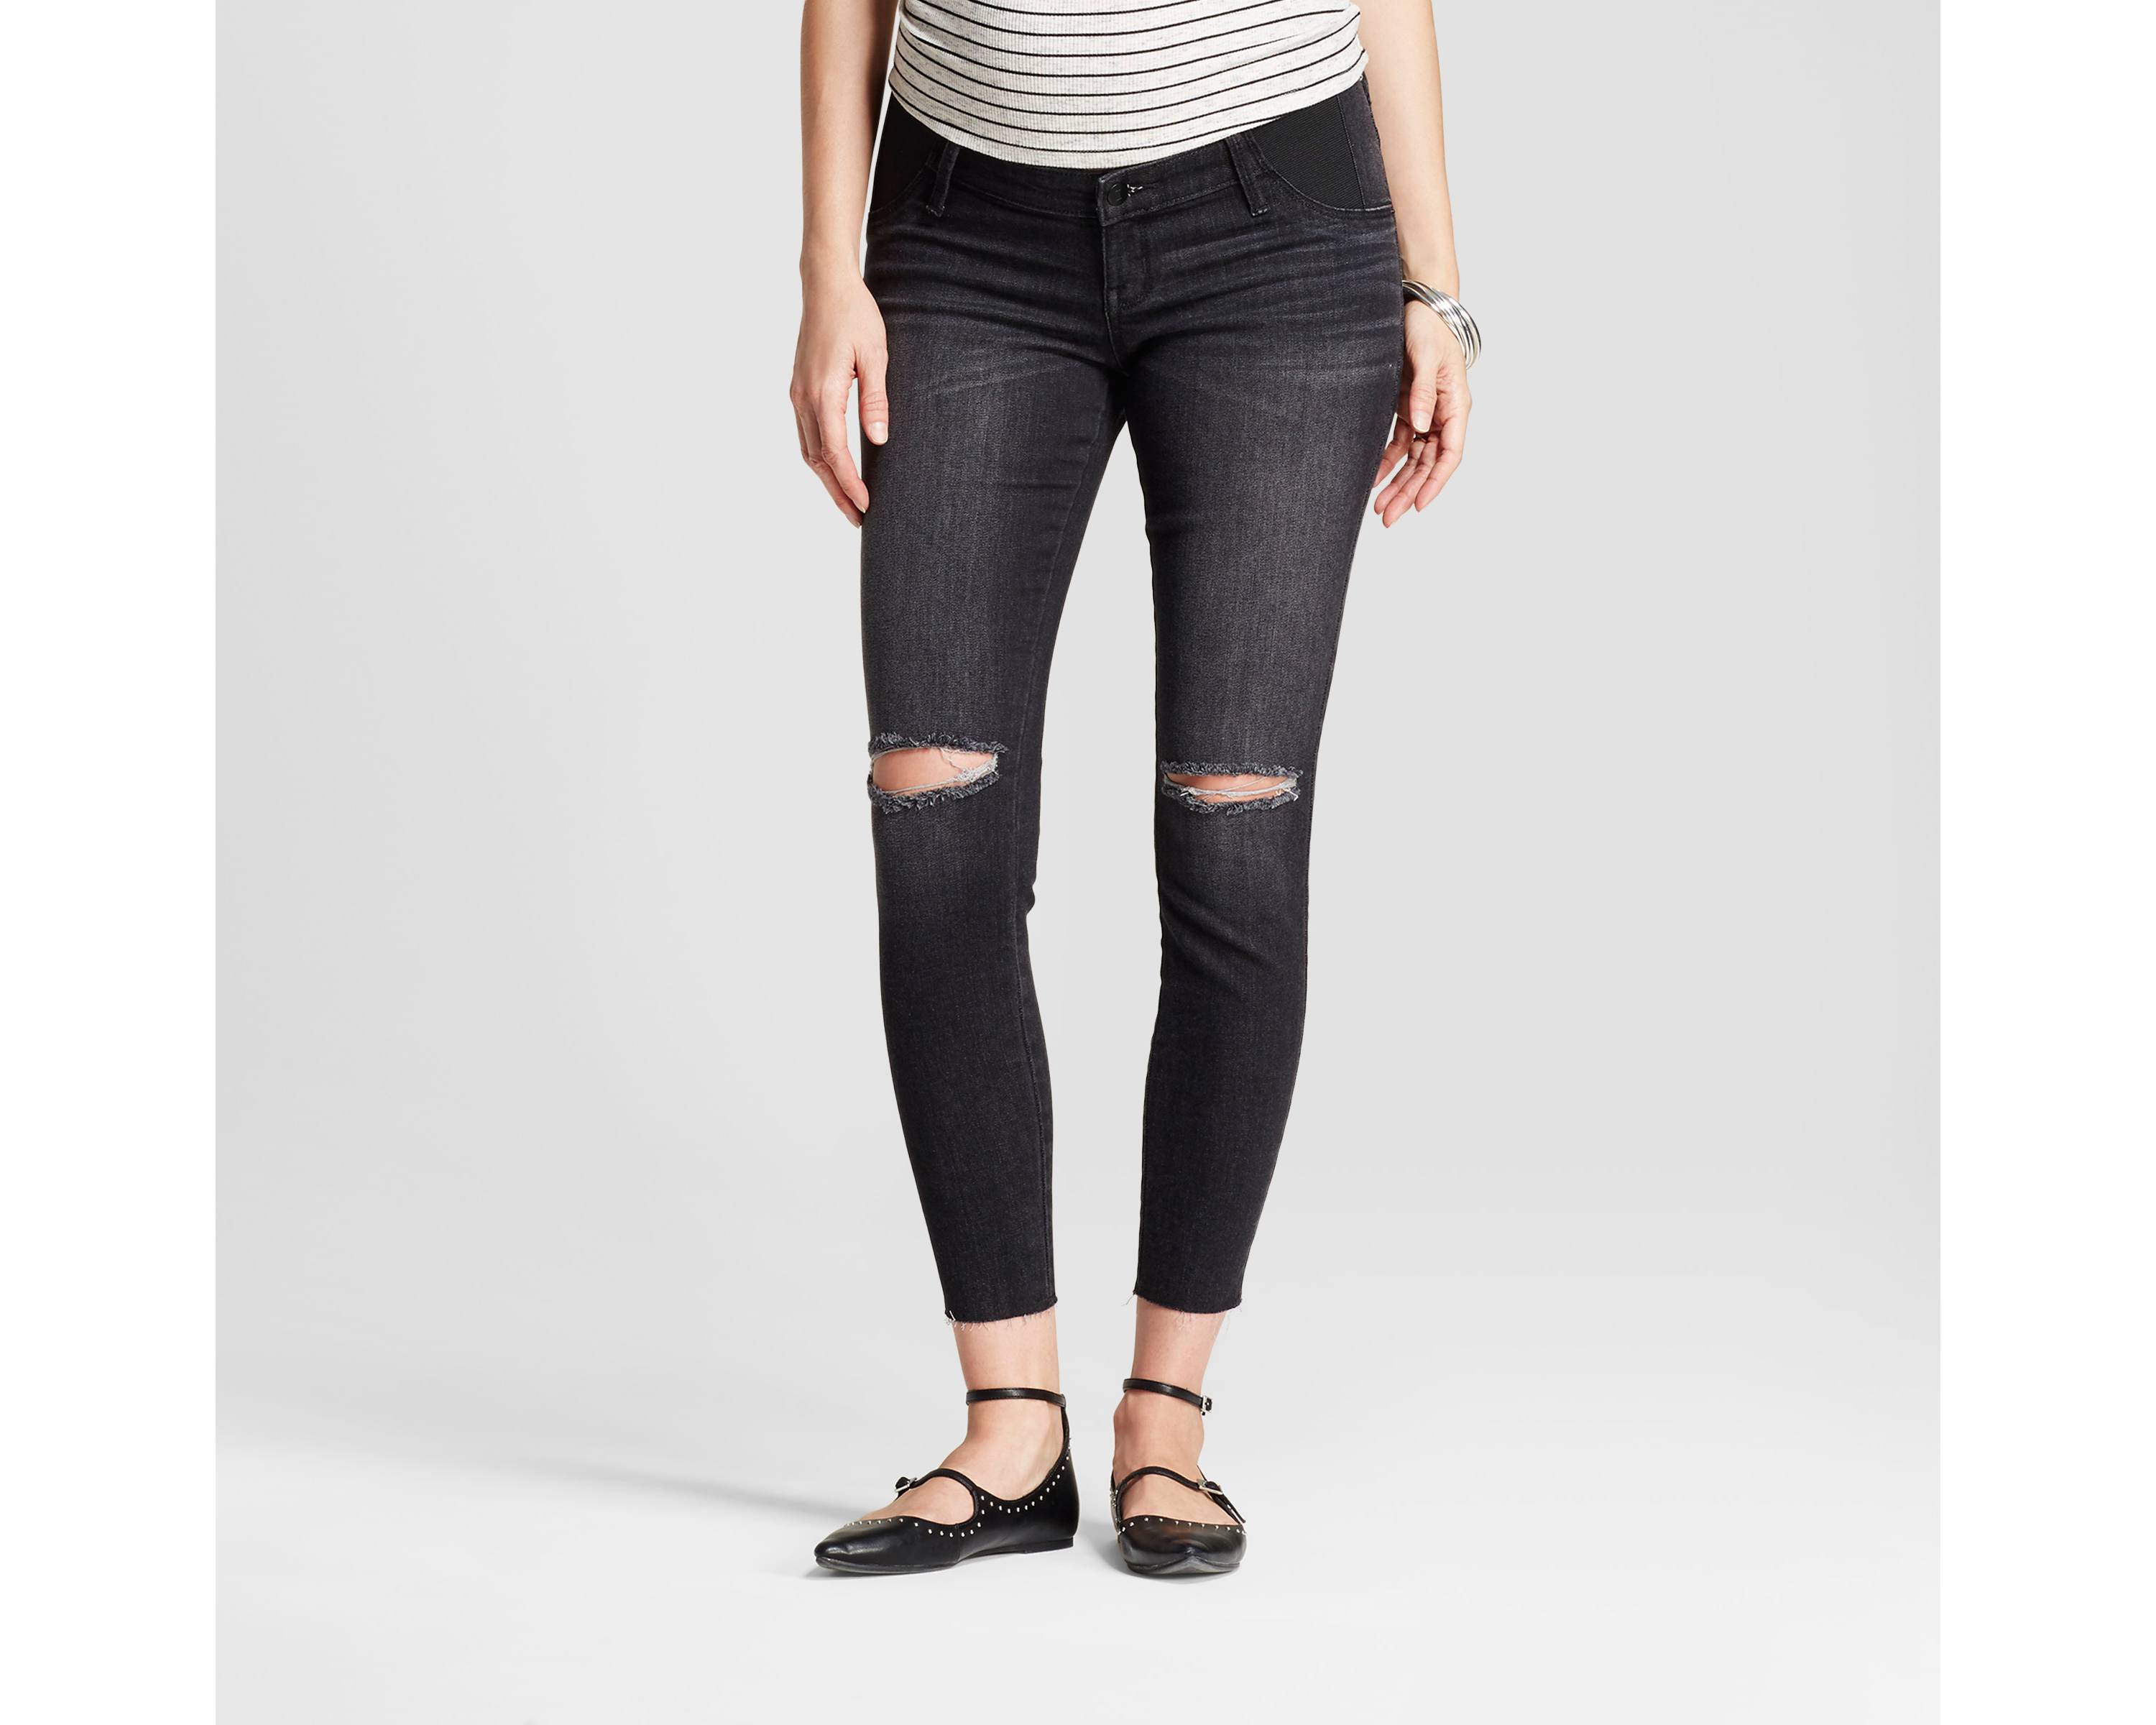 Isabel Maternity jeans review at Target